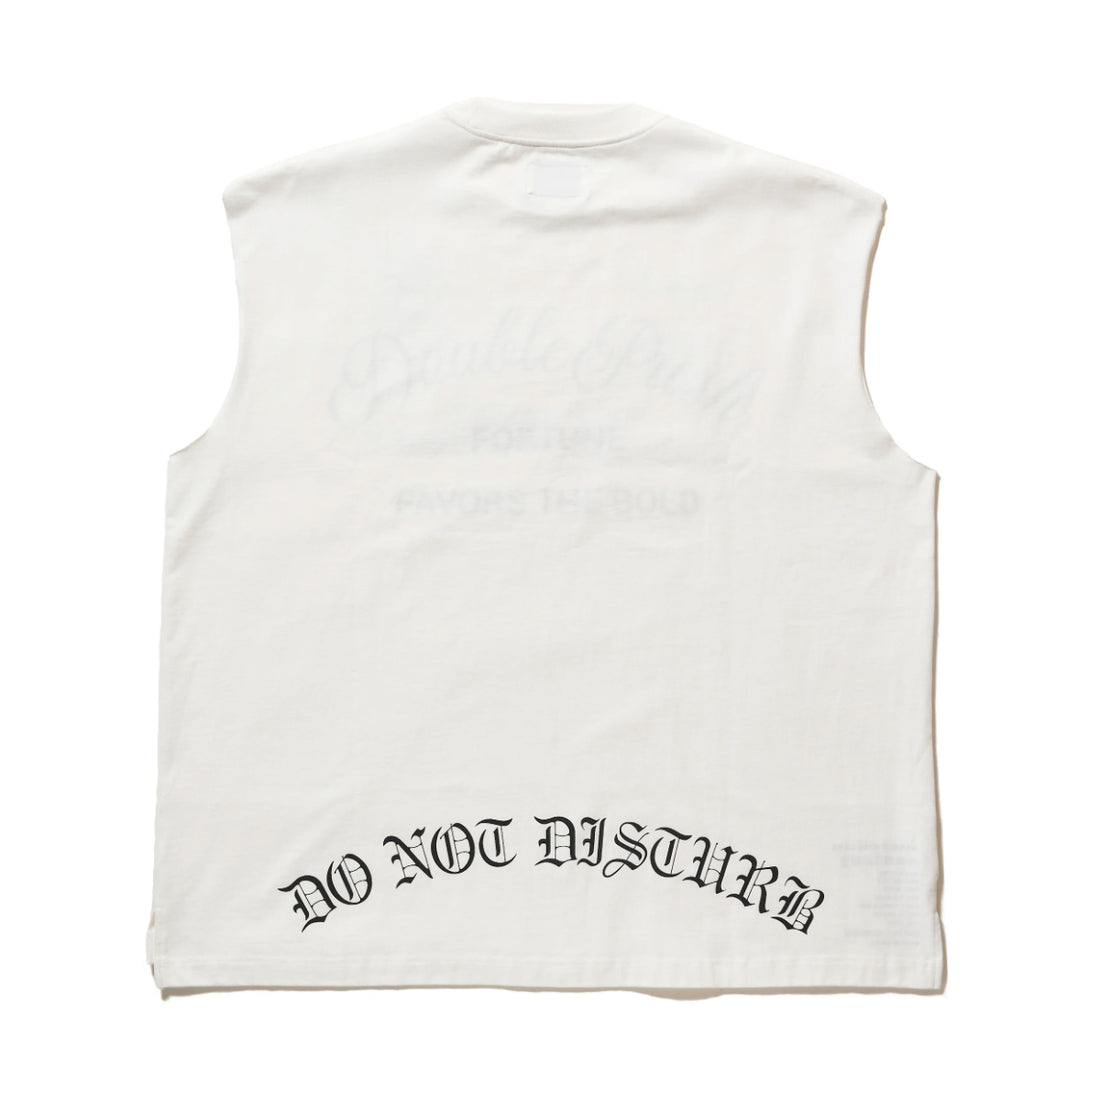 [TAIN DOUBLE PUSH]POWER DEPARTMENT NO SLEEVE T-SHIRTS/WHITE(T411-NT005)